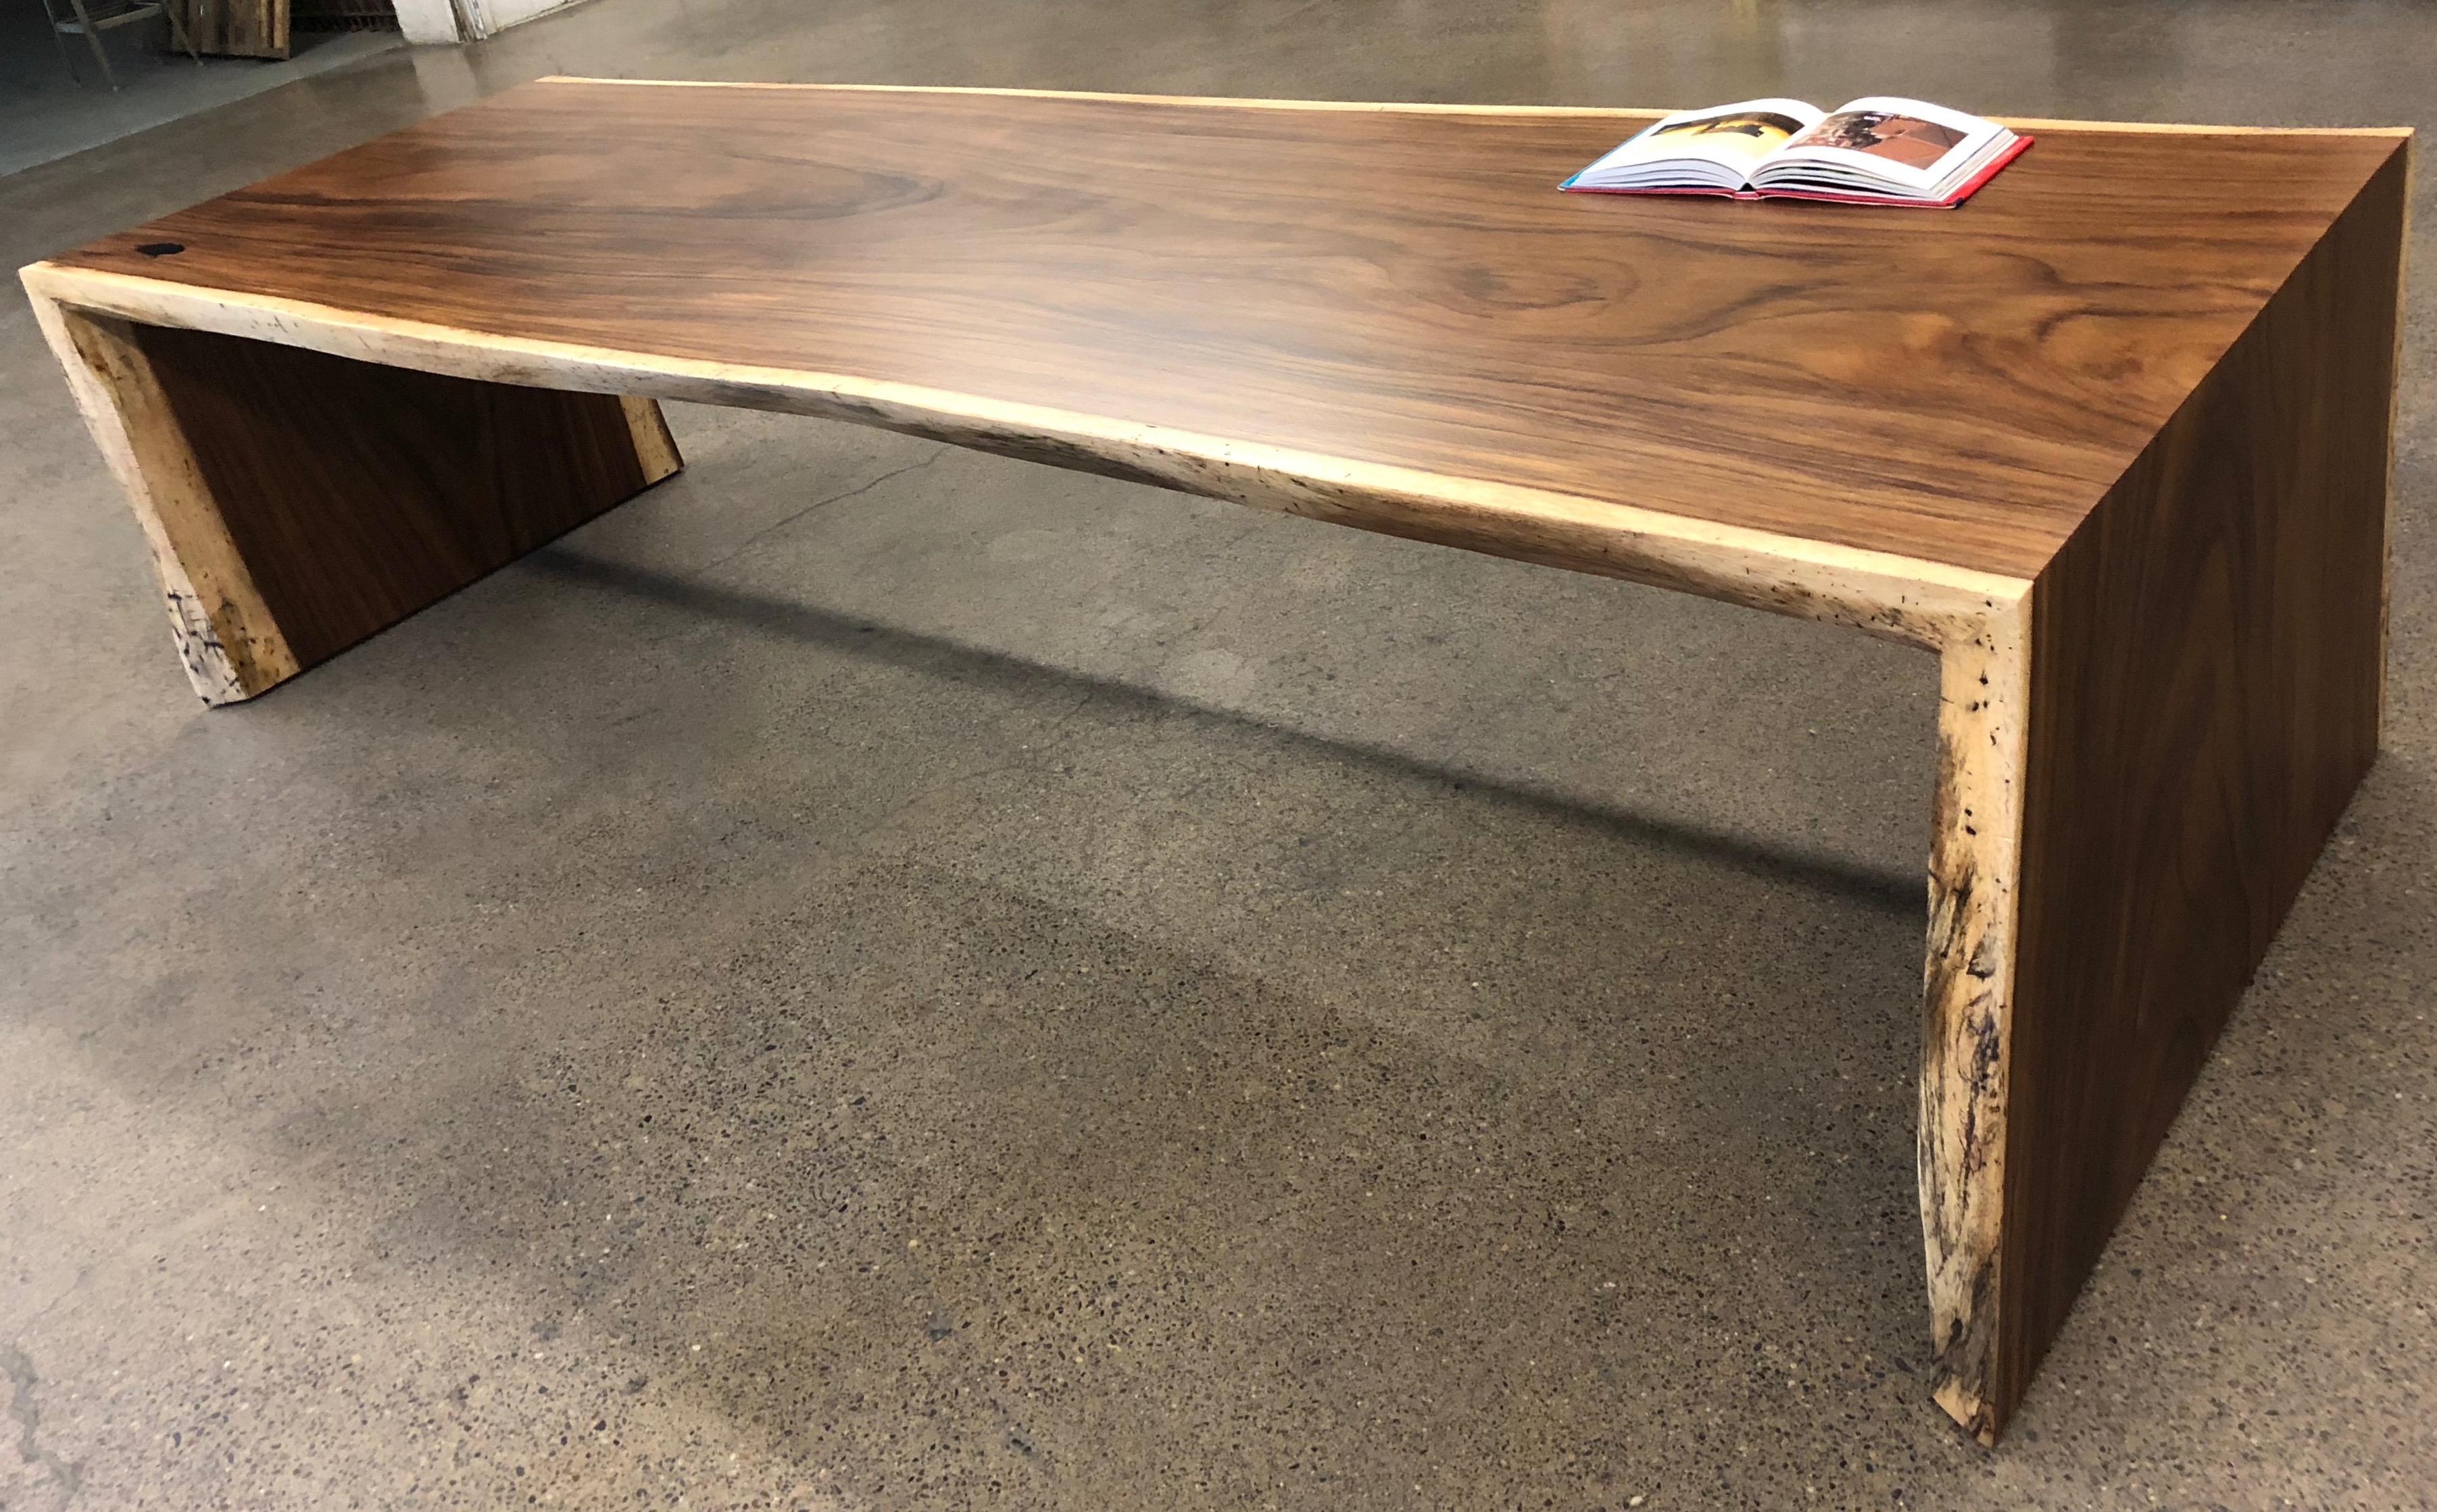 Single slab full miter 11ft long monkeypod dining table with raw edge In New Condition For Sale In St Louis Park, MN